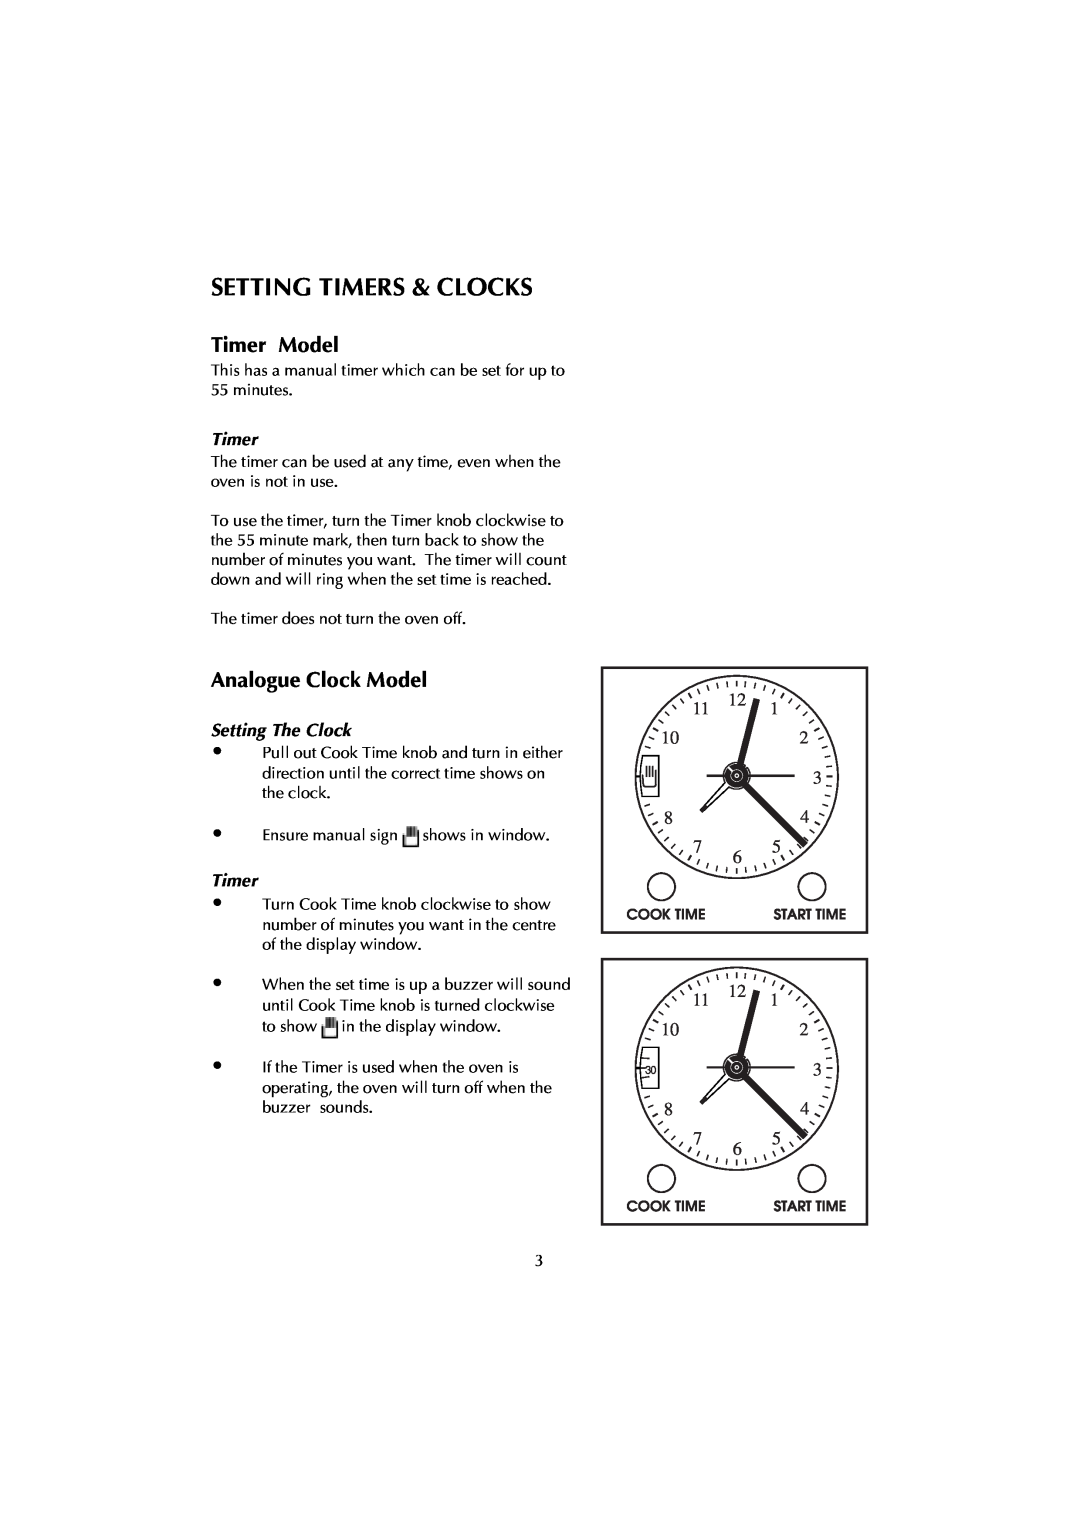 Fisher & Paykel 447443 manual Setting Timers & Clocks, Timer Model, Analogue Clock Model, Setting The Clock 